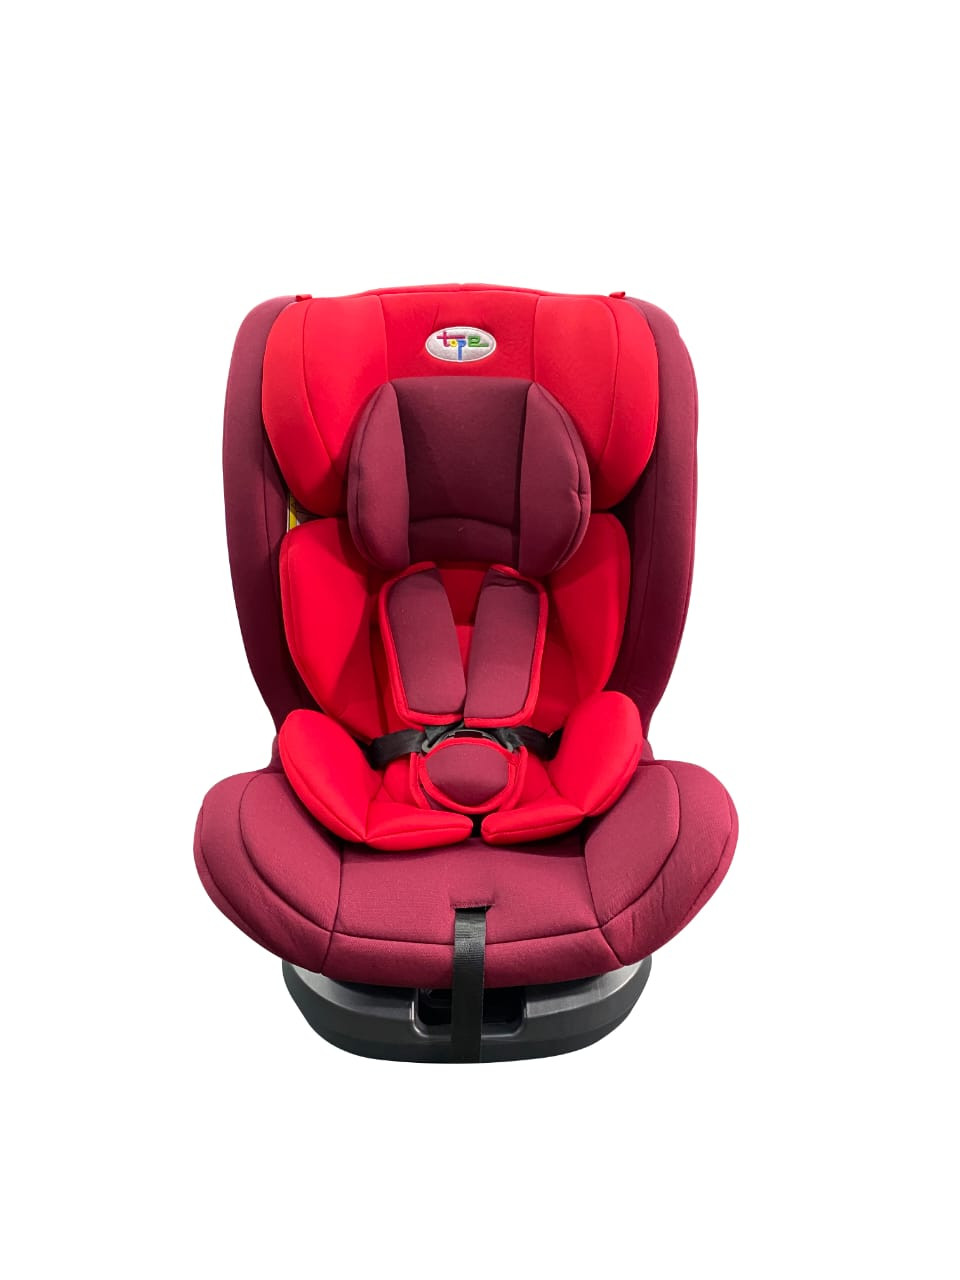 TOP 2 ISOFIX BABY CAR SEAT - 360 DEGREES ROTATION - BLACK/RED